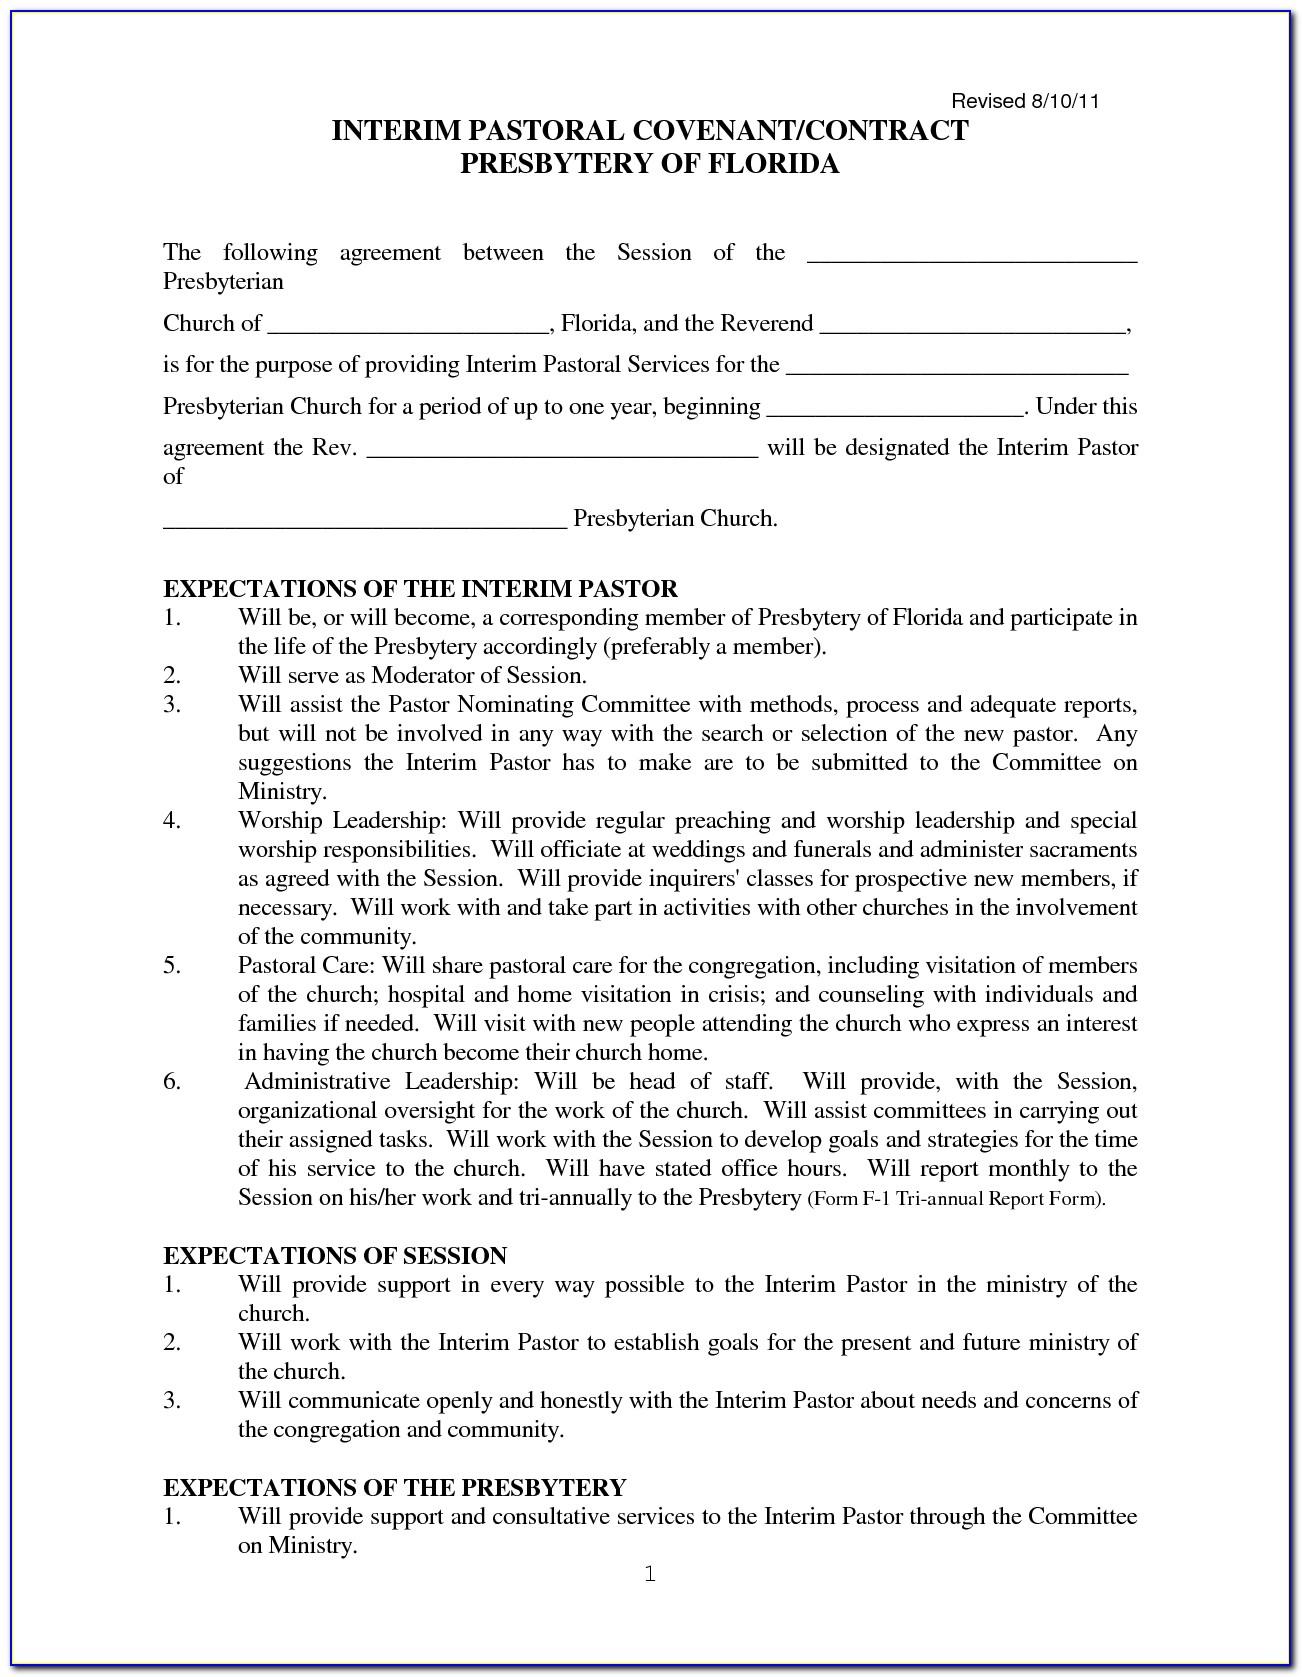 Self Employed Contract Template Word